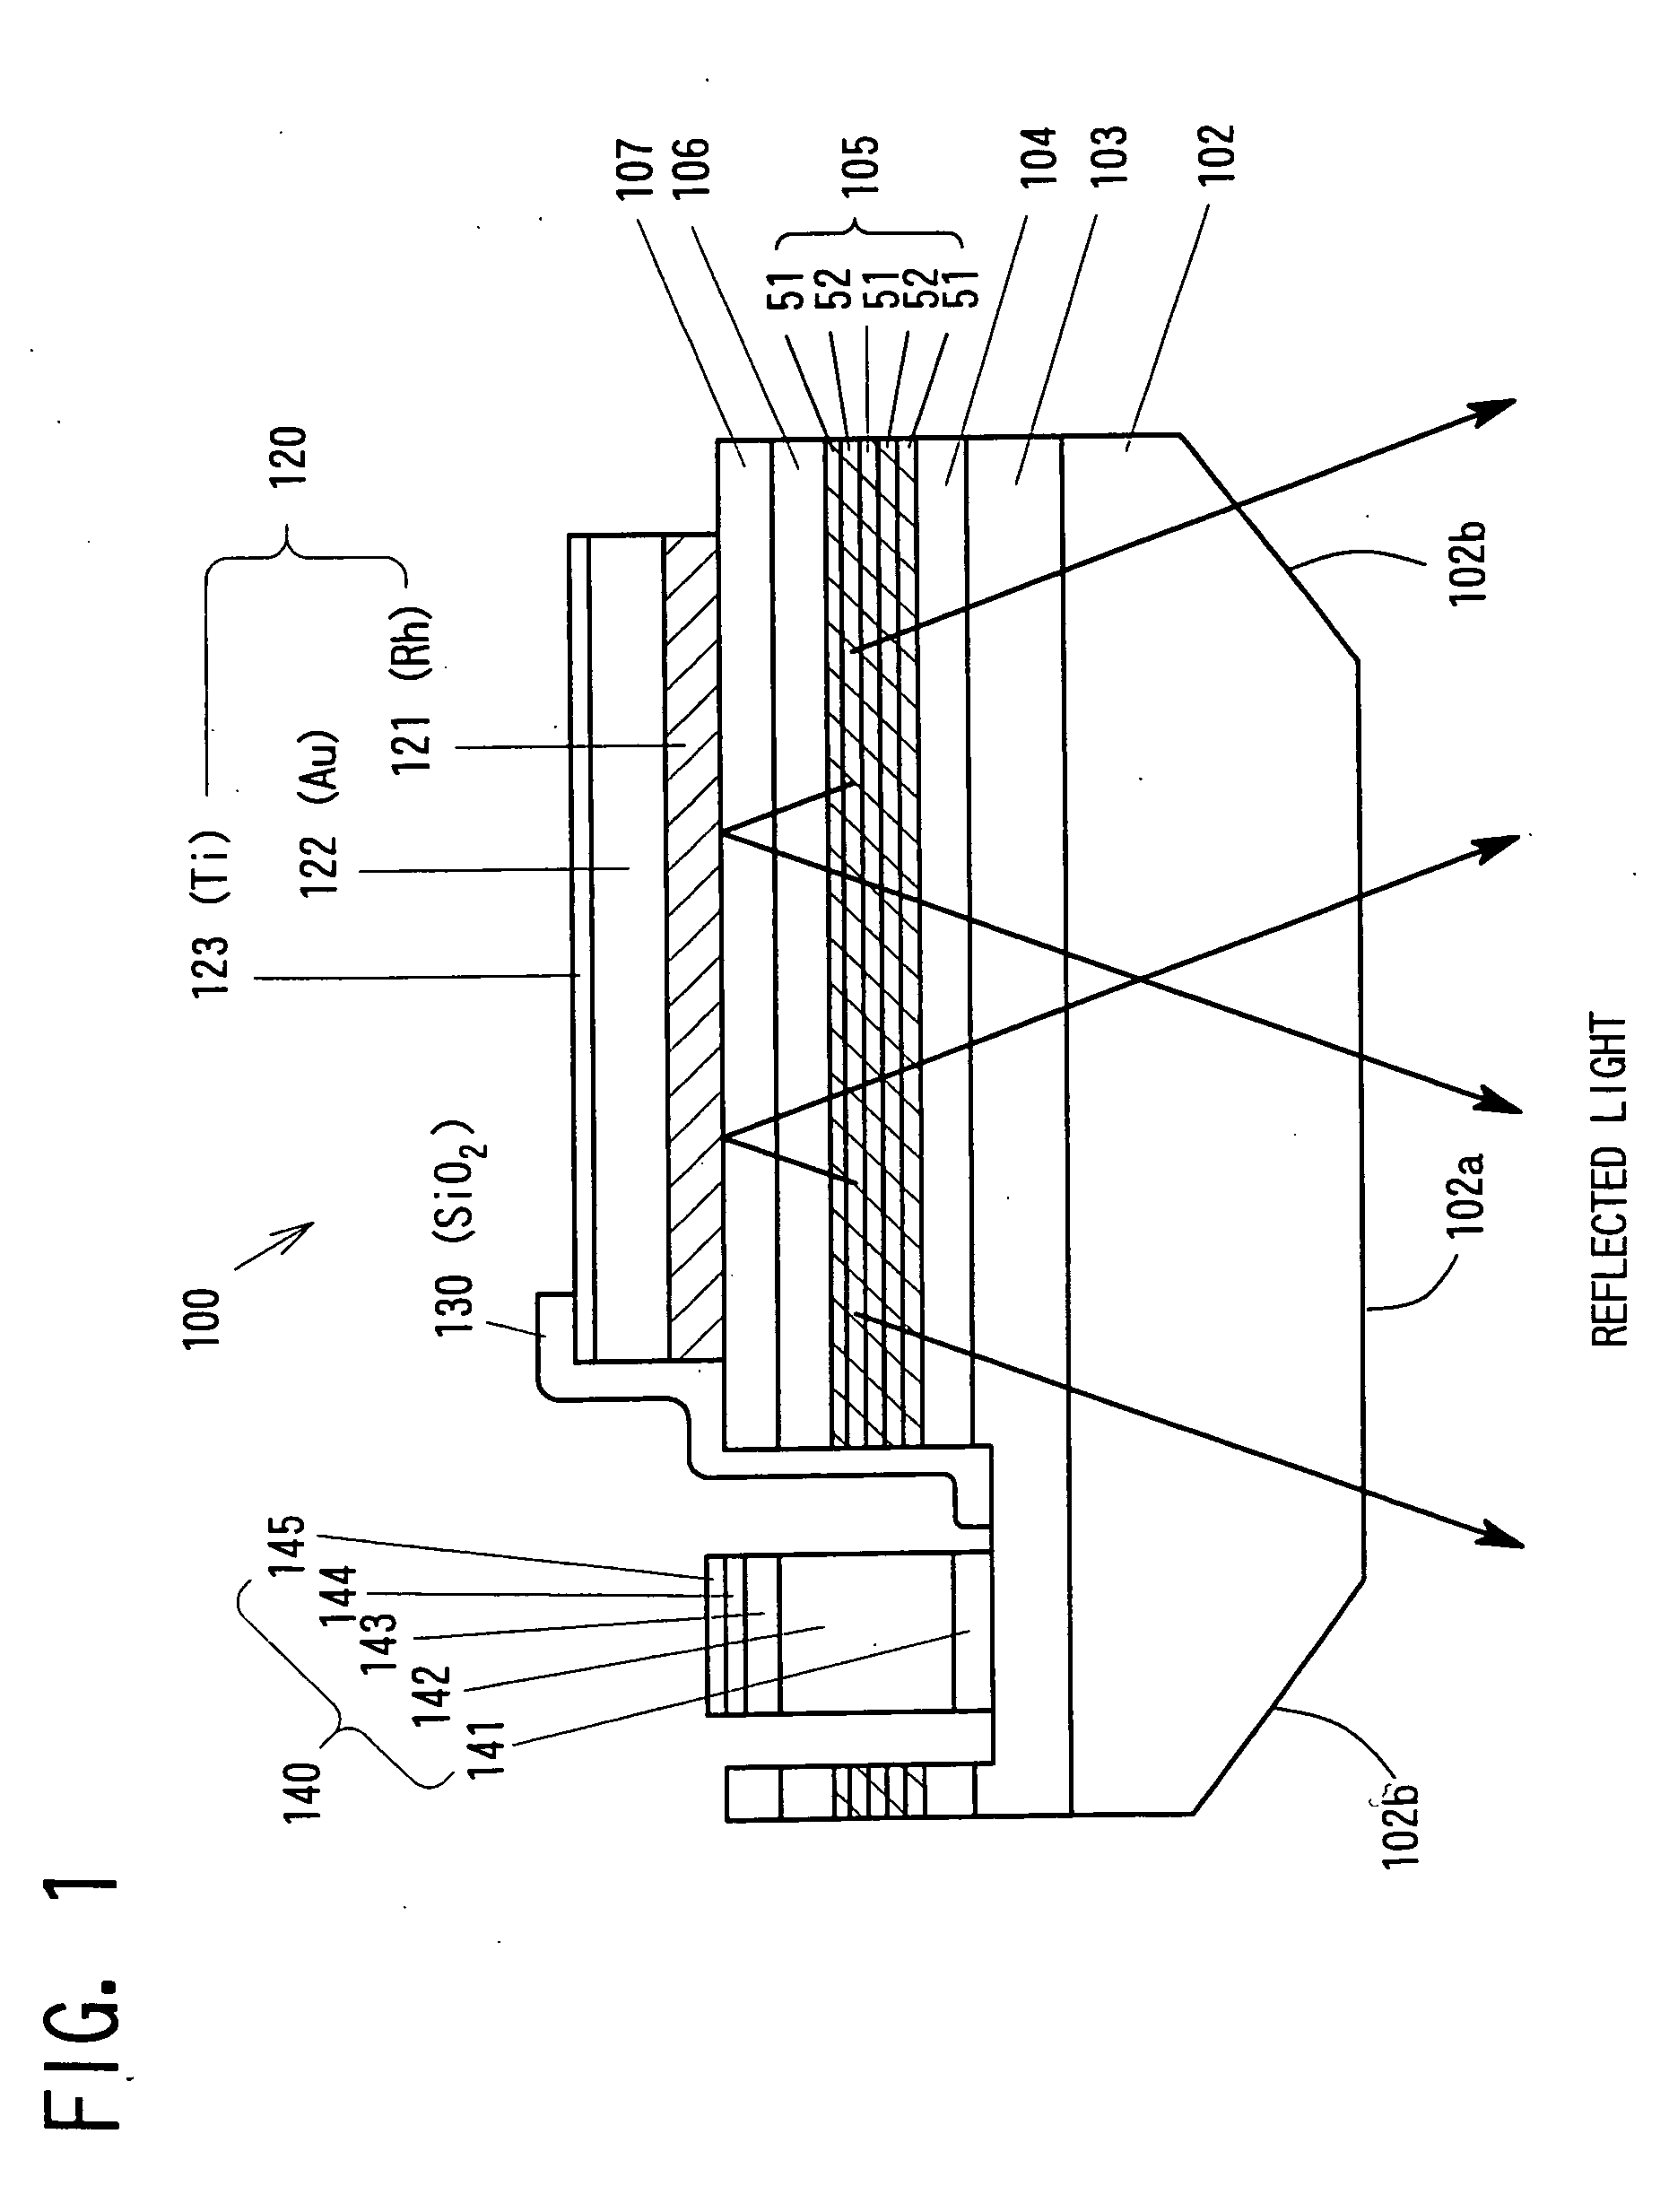 Light-emitting diode and process for producing the same